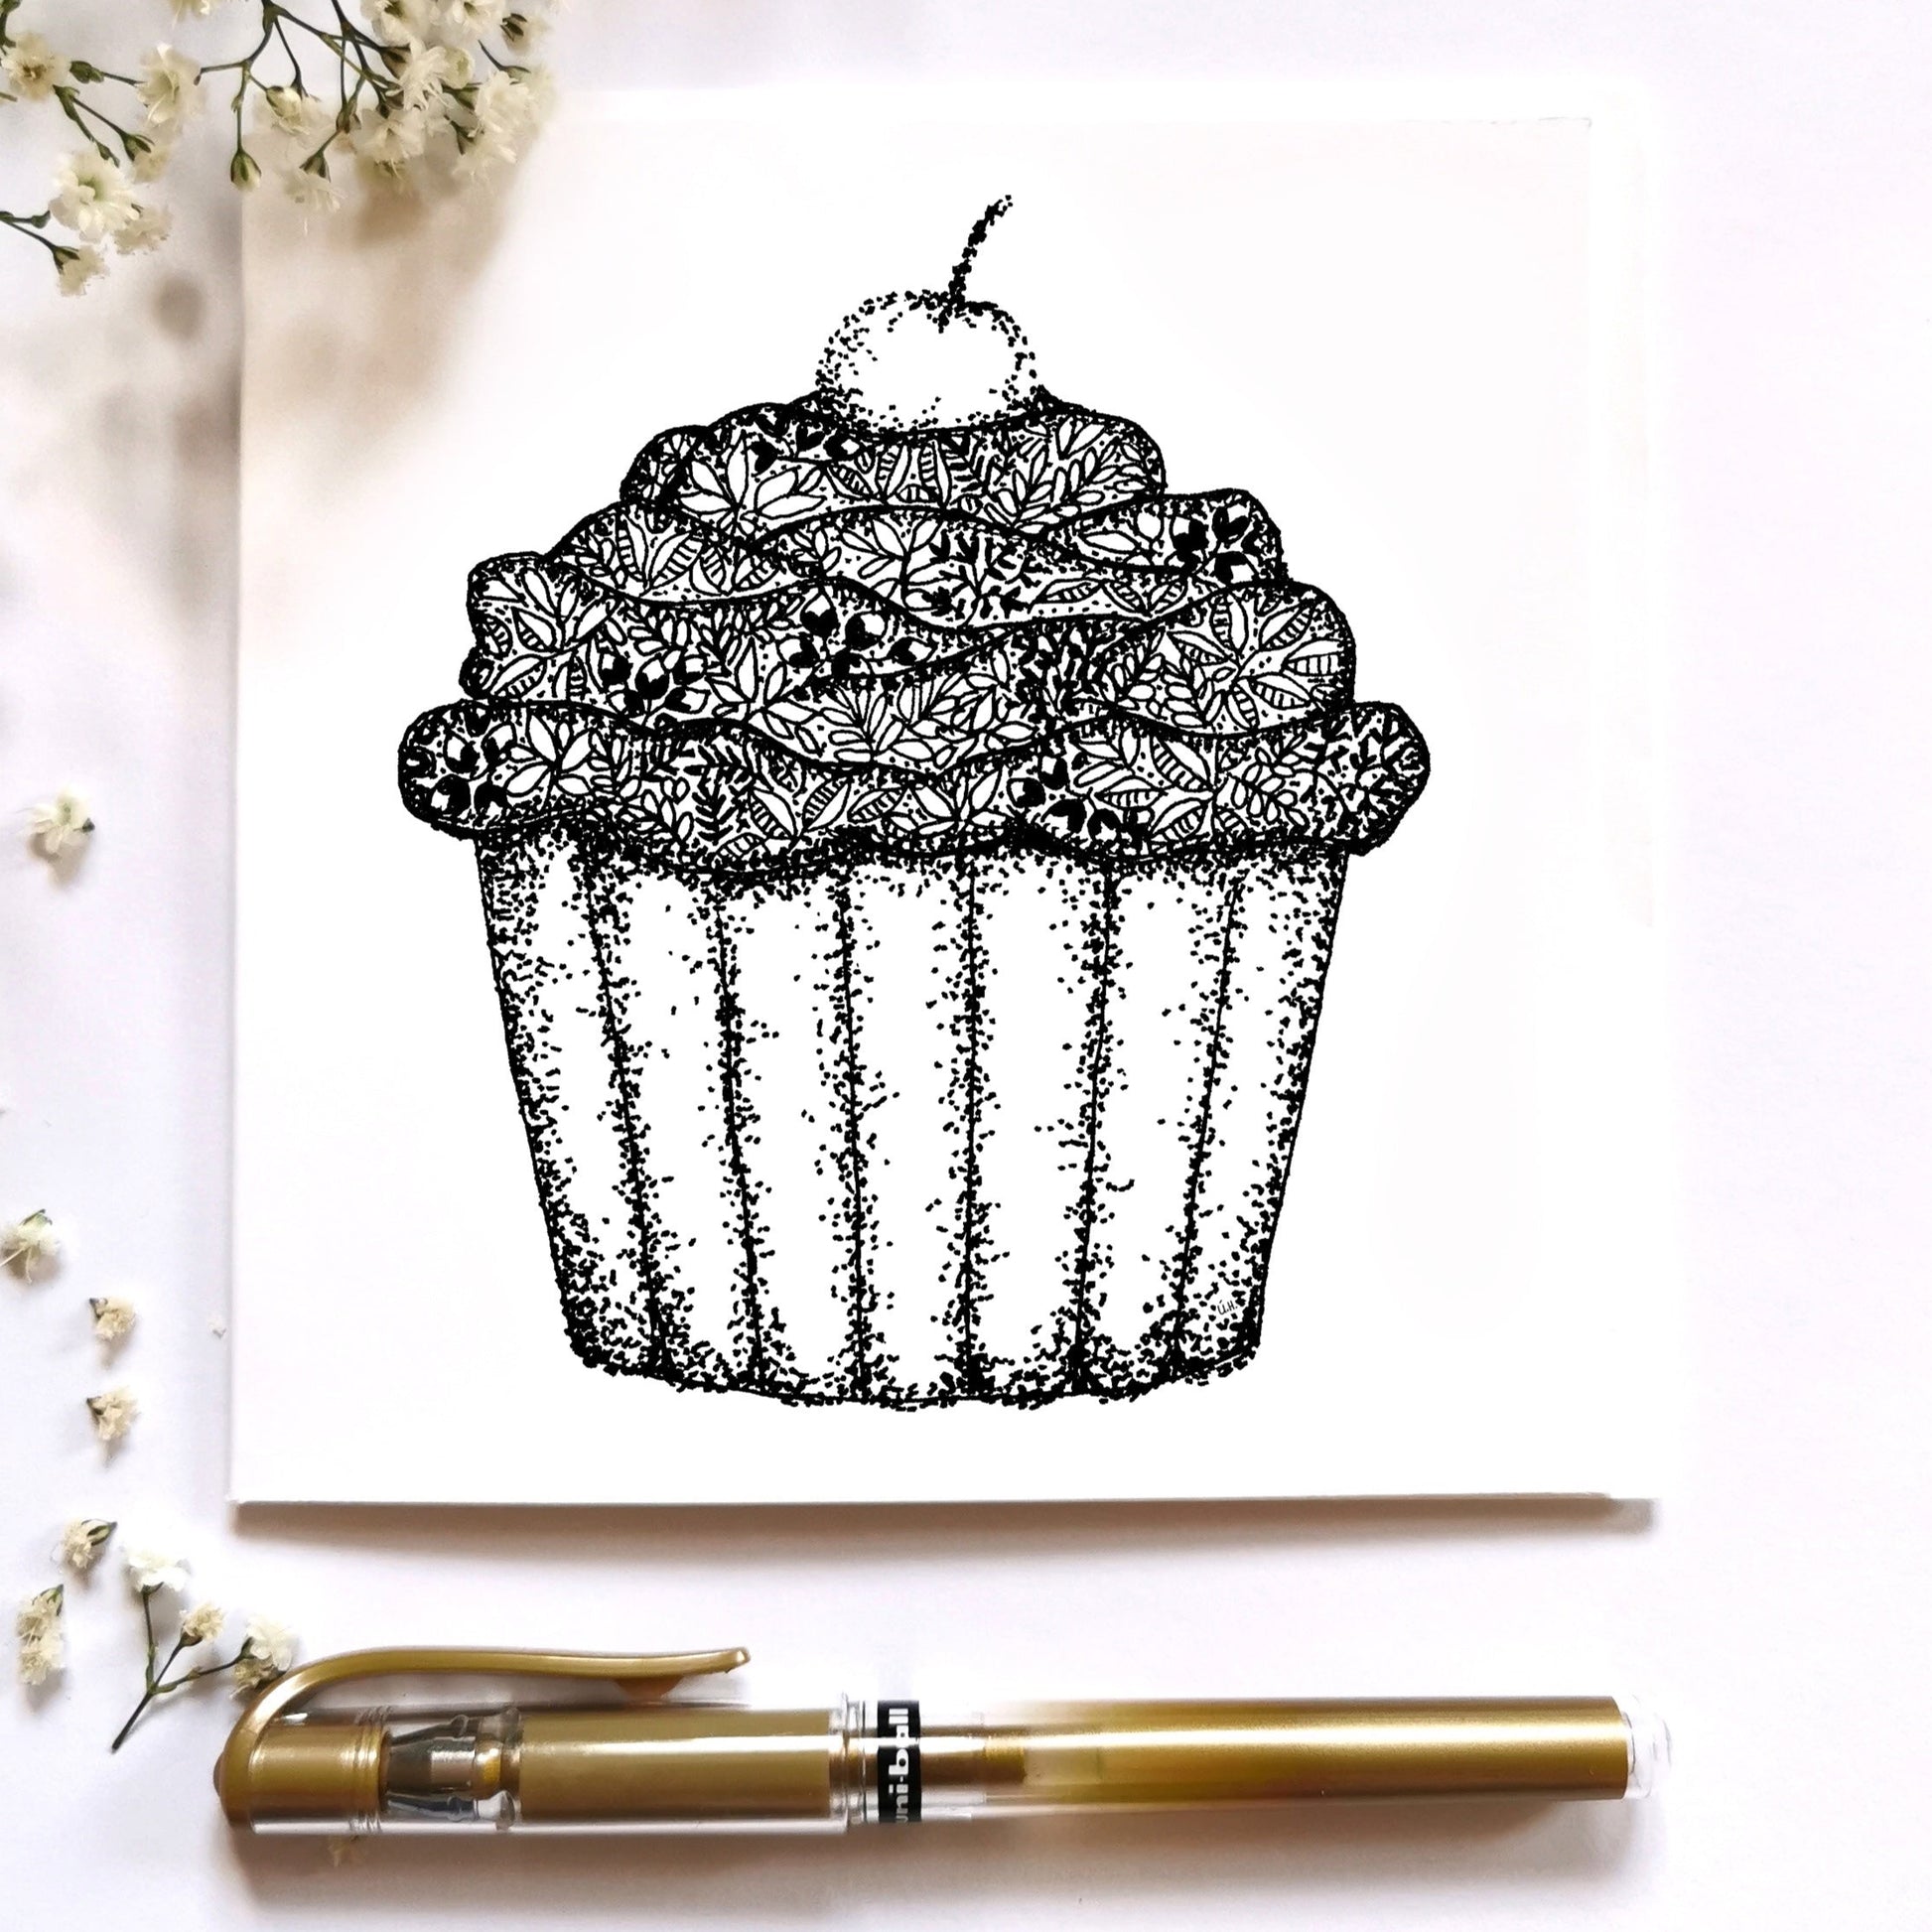 Image shows cupcake drawing with cherry on top. illustration is made from floral drawings and dots to show detail and give shadowing to image. 